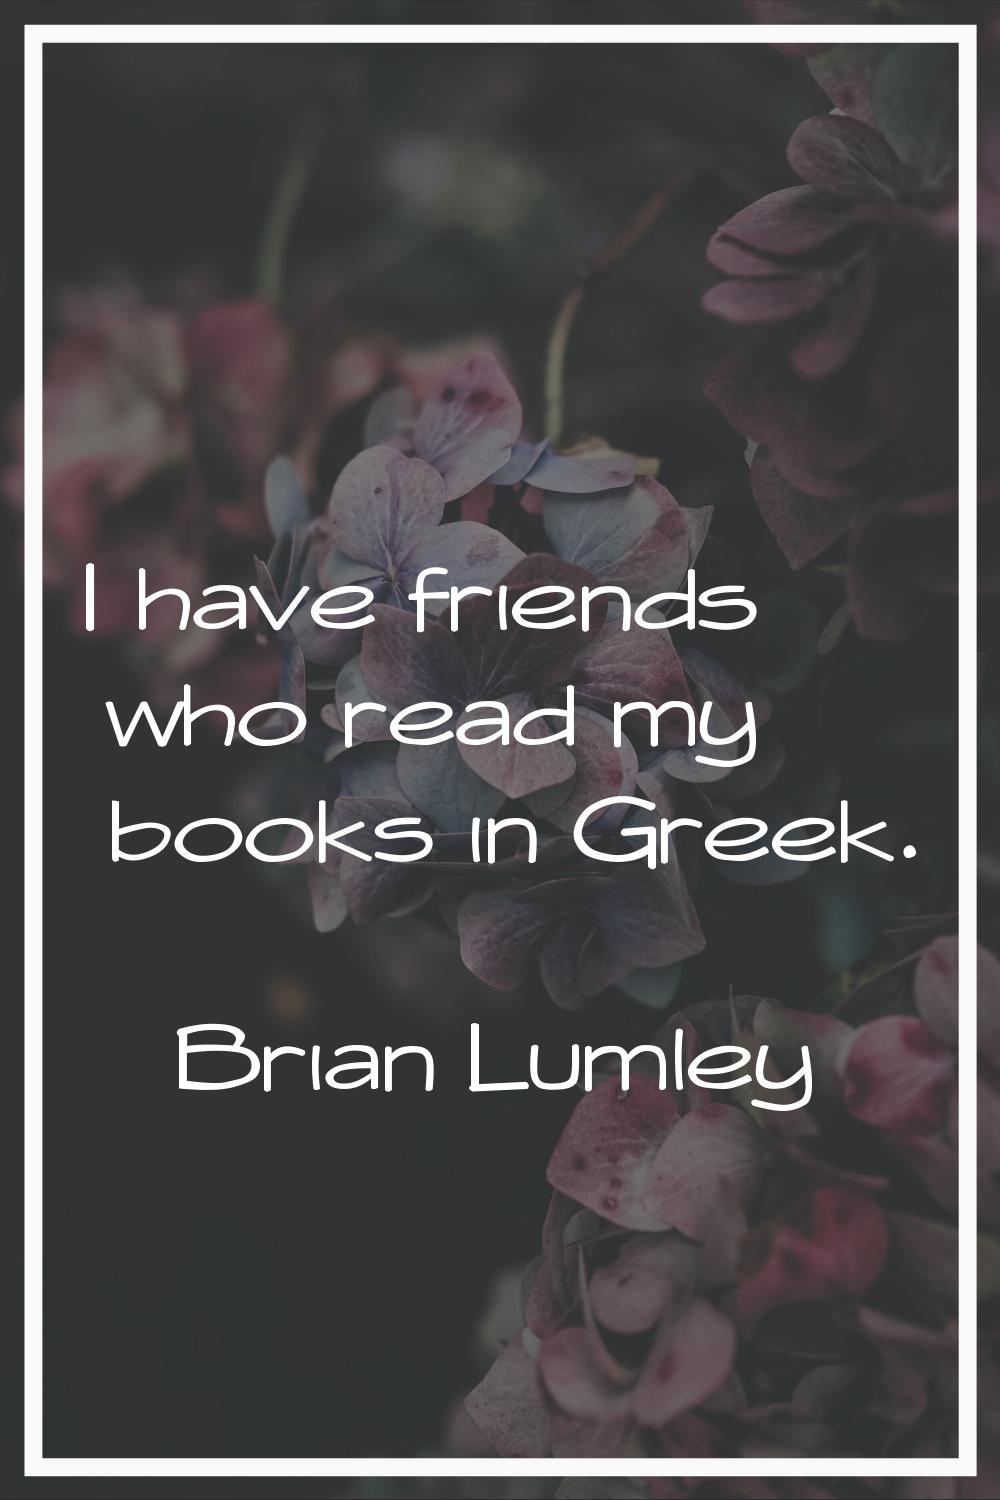 I have friends who read my books in Greek.